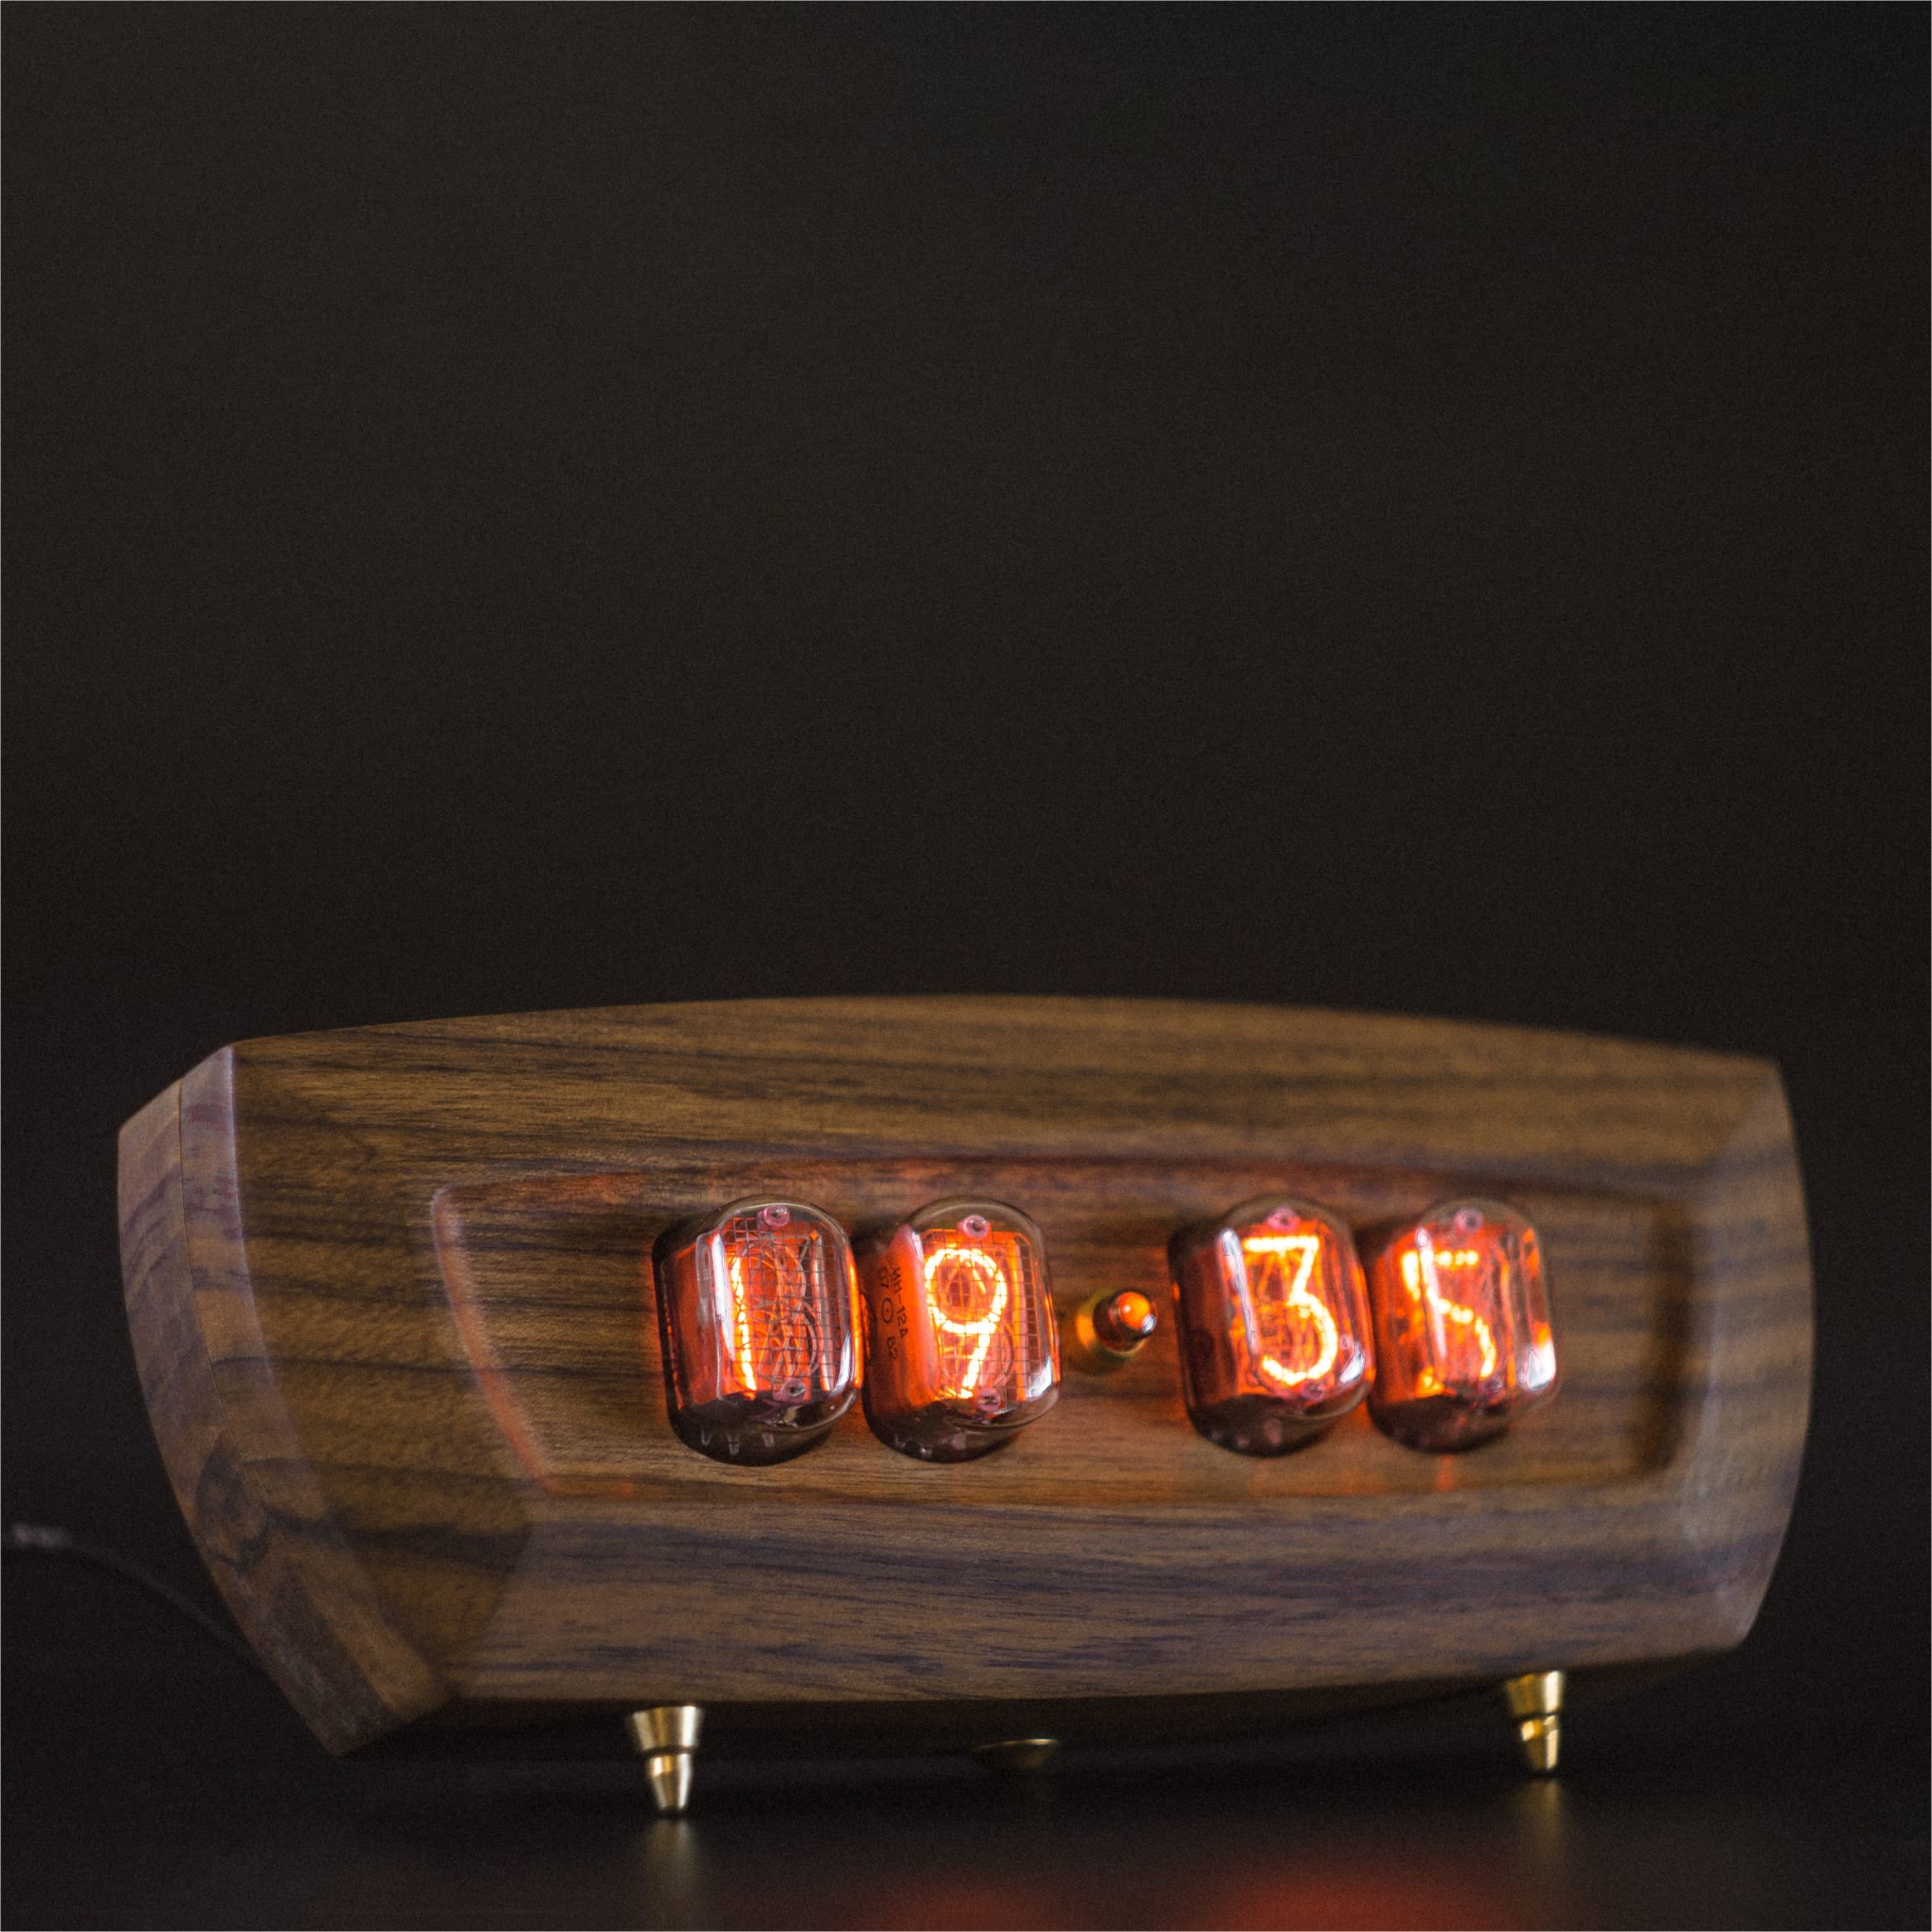 Nixie Tube Clock with Easy Replaceable IN-12 Nixie Tubes - Motion Sensor - Visual Effects - RGB Backlight - Christmas Gift Idea